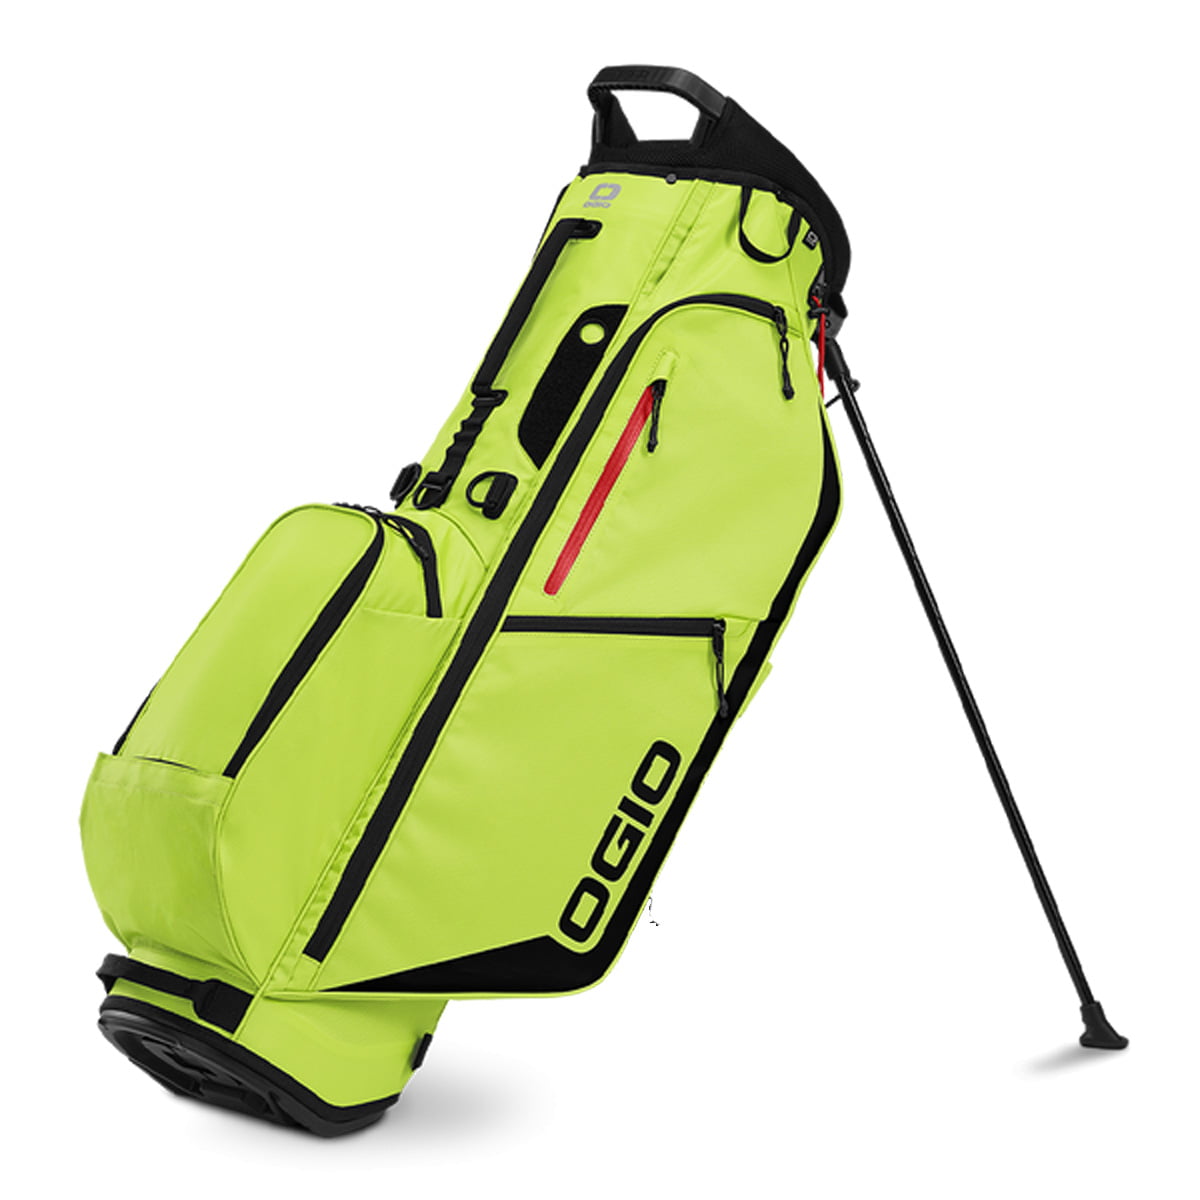 NEW Ogio Fuse 4 Neon Yellow/Black Stand/Carry Golf Bag 